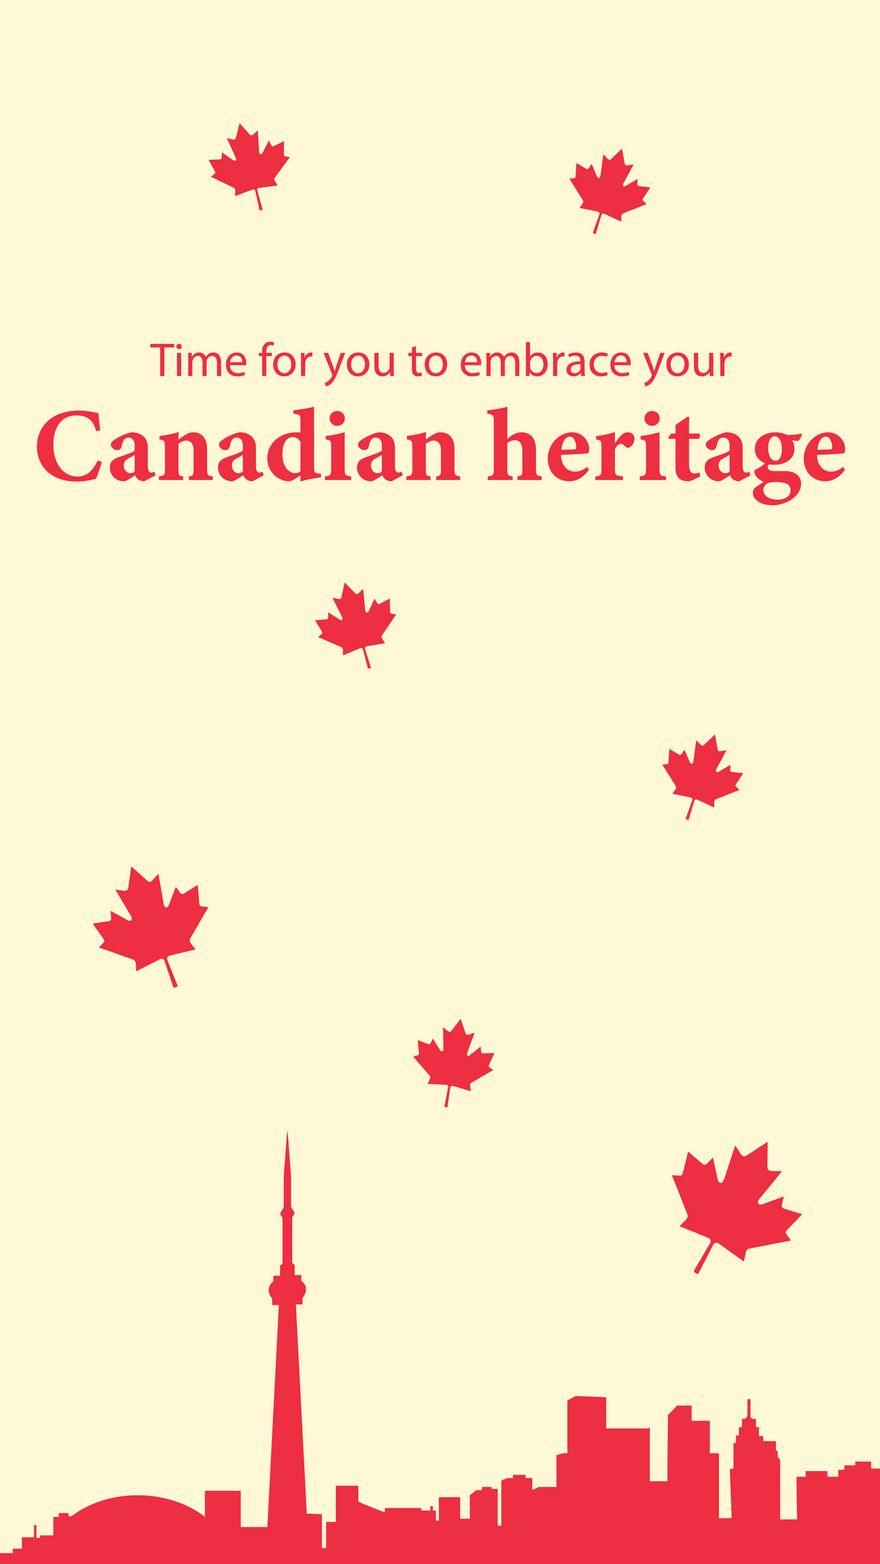 Free Canada Day Greeting Card Background in PDF, Illustrator, PSD, EPS, SVG, JPG, PNG